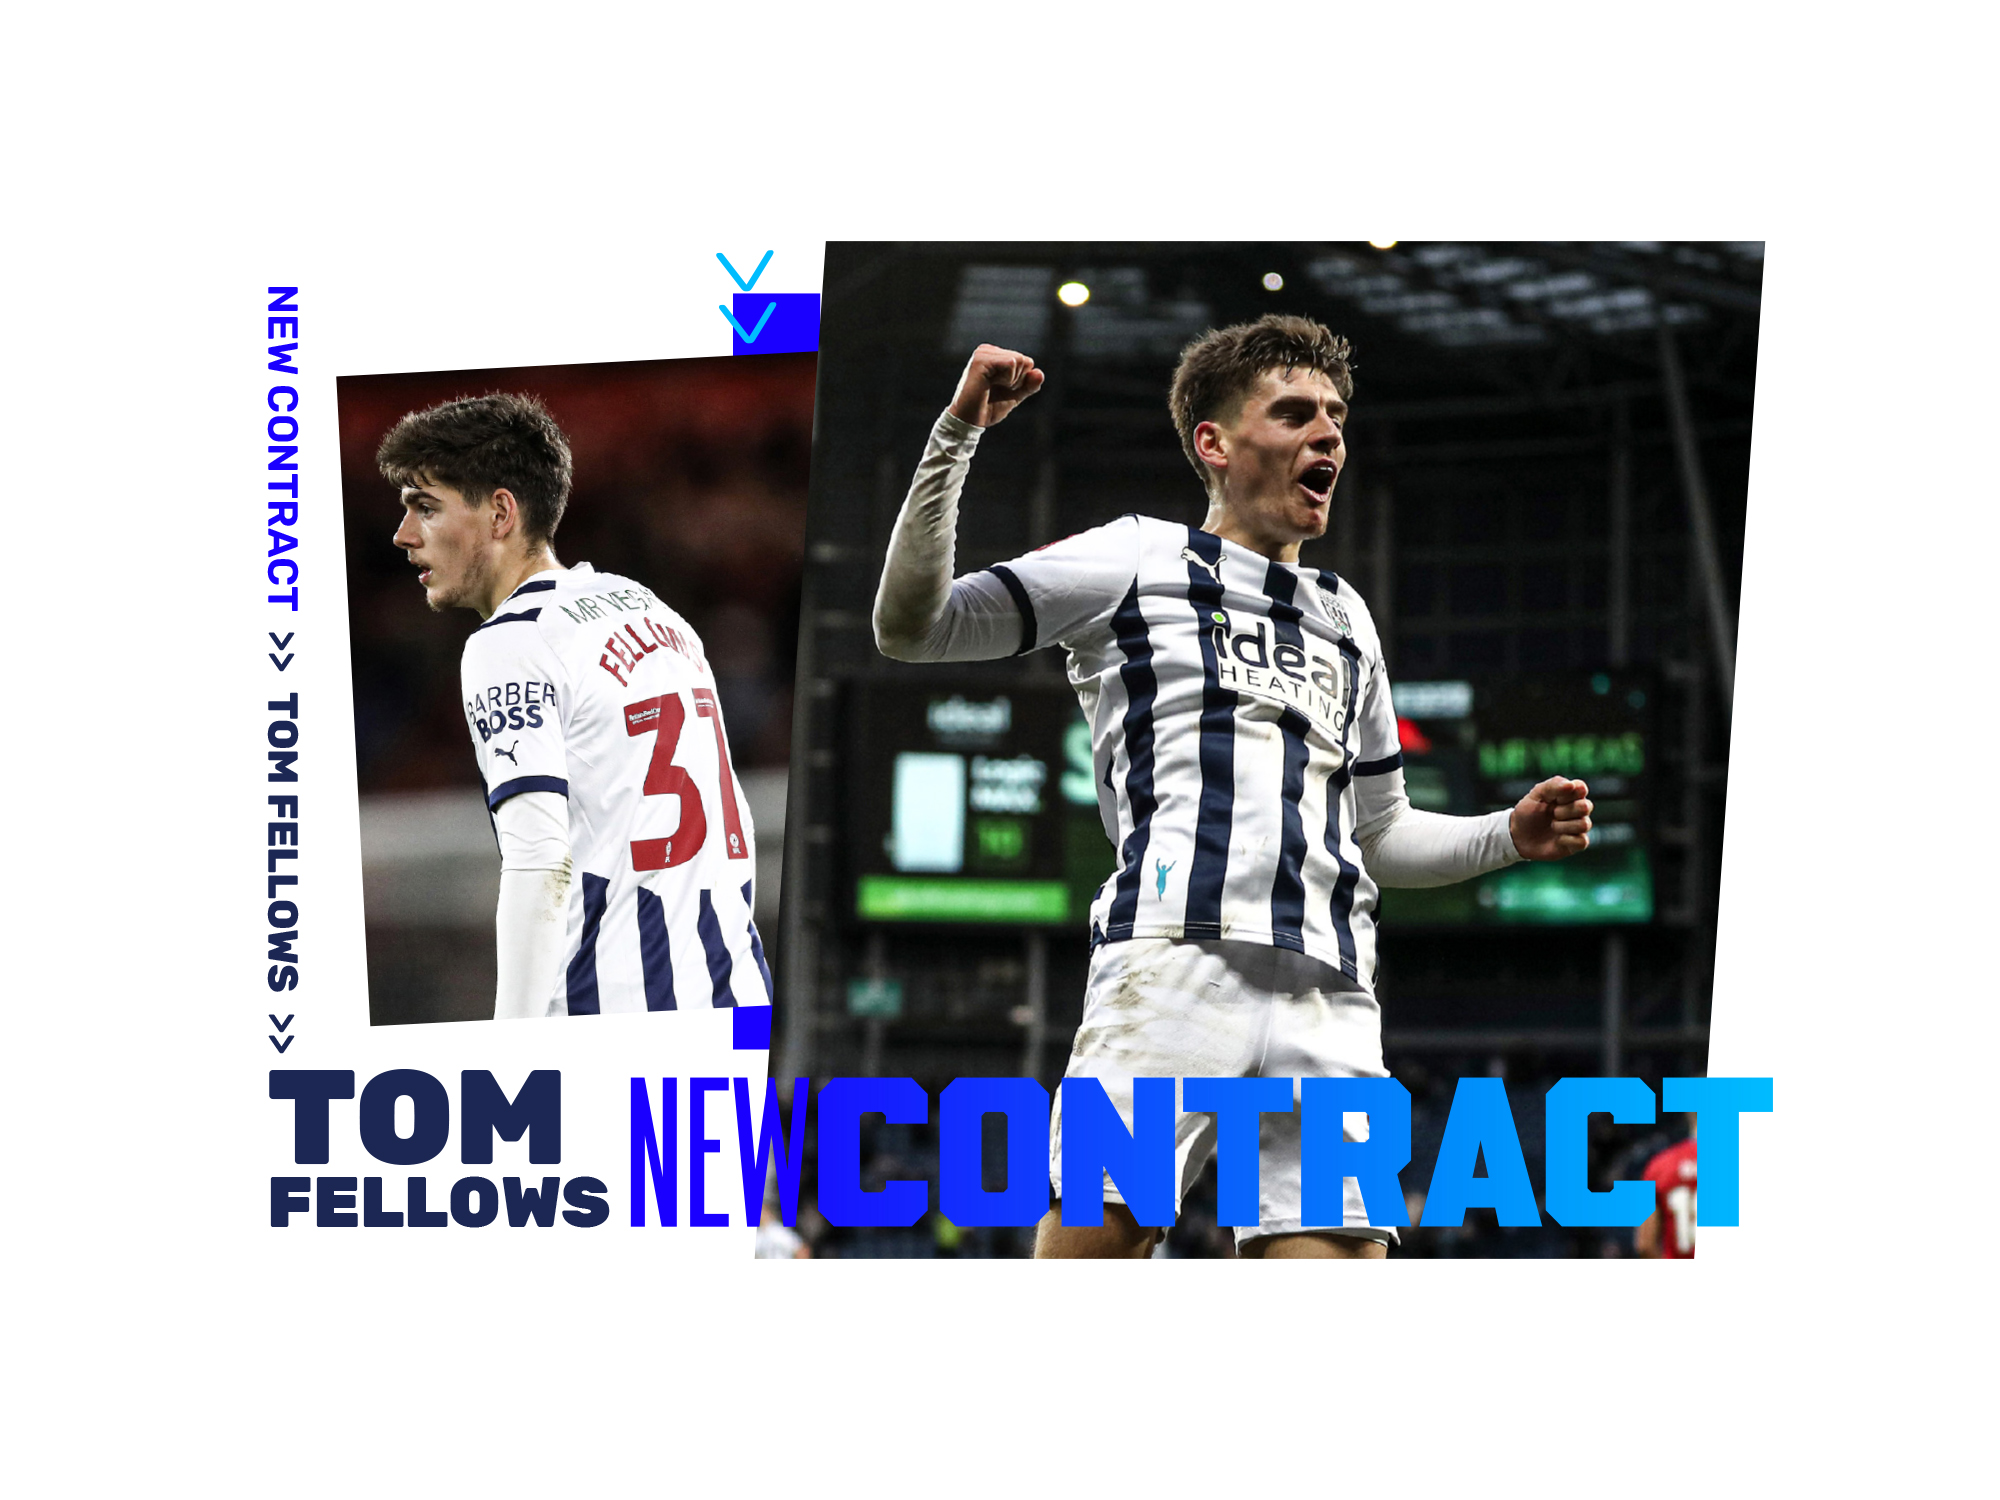 Tom Fellows new signing graphic 